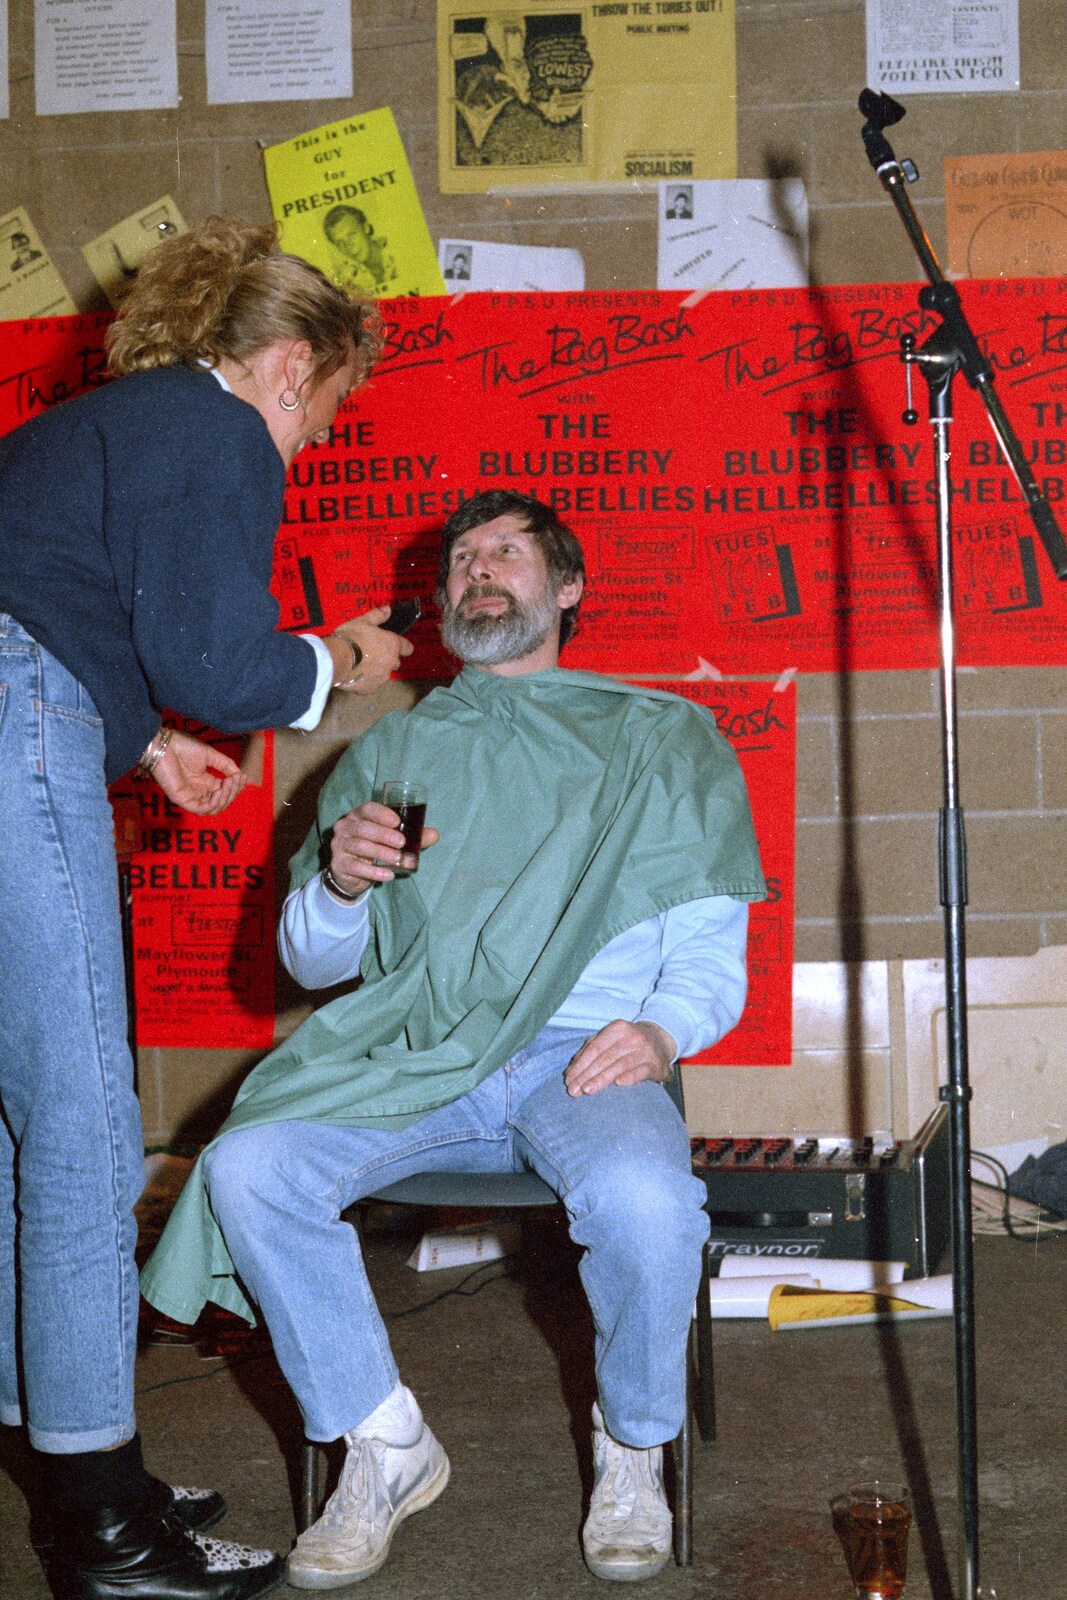 Brian gets ready for a shaving from Uni: Pirate RAG Bash, Games Nights and Brian's Beard, PPSU, Plymouth - 10th February 1987